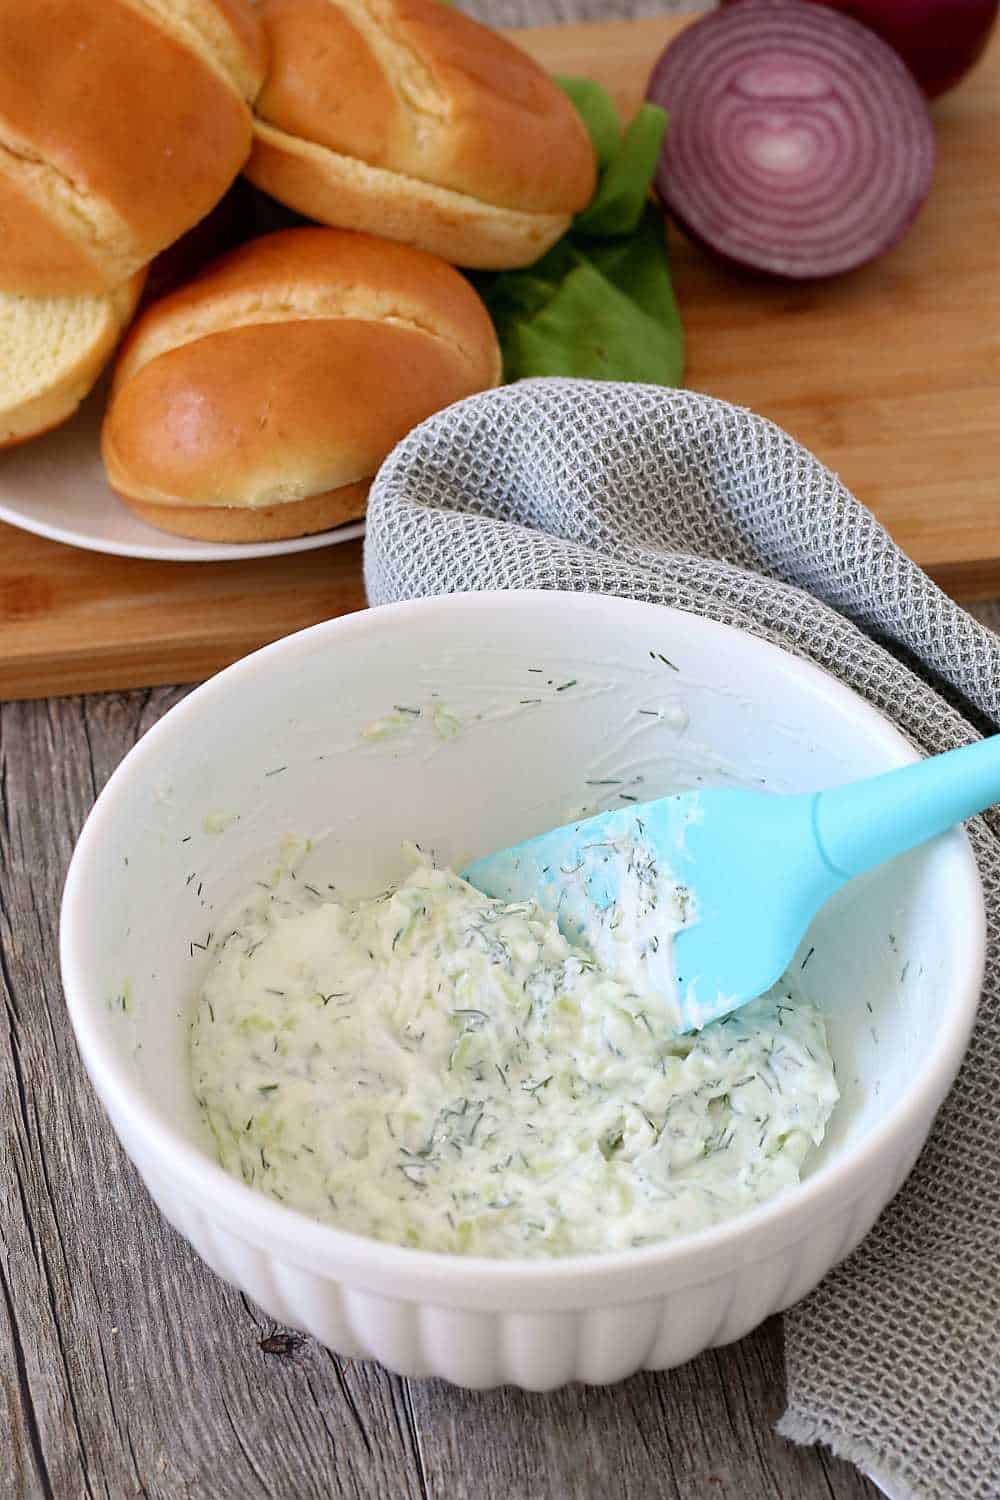 Greek burgers wouldn't be the same without the homemade tzatziki topping which is being mixed up here! 